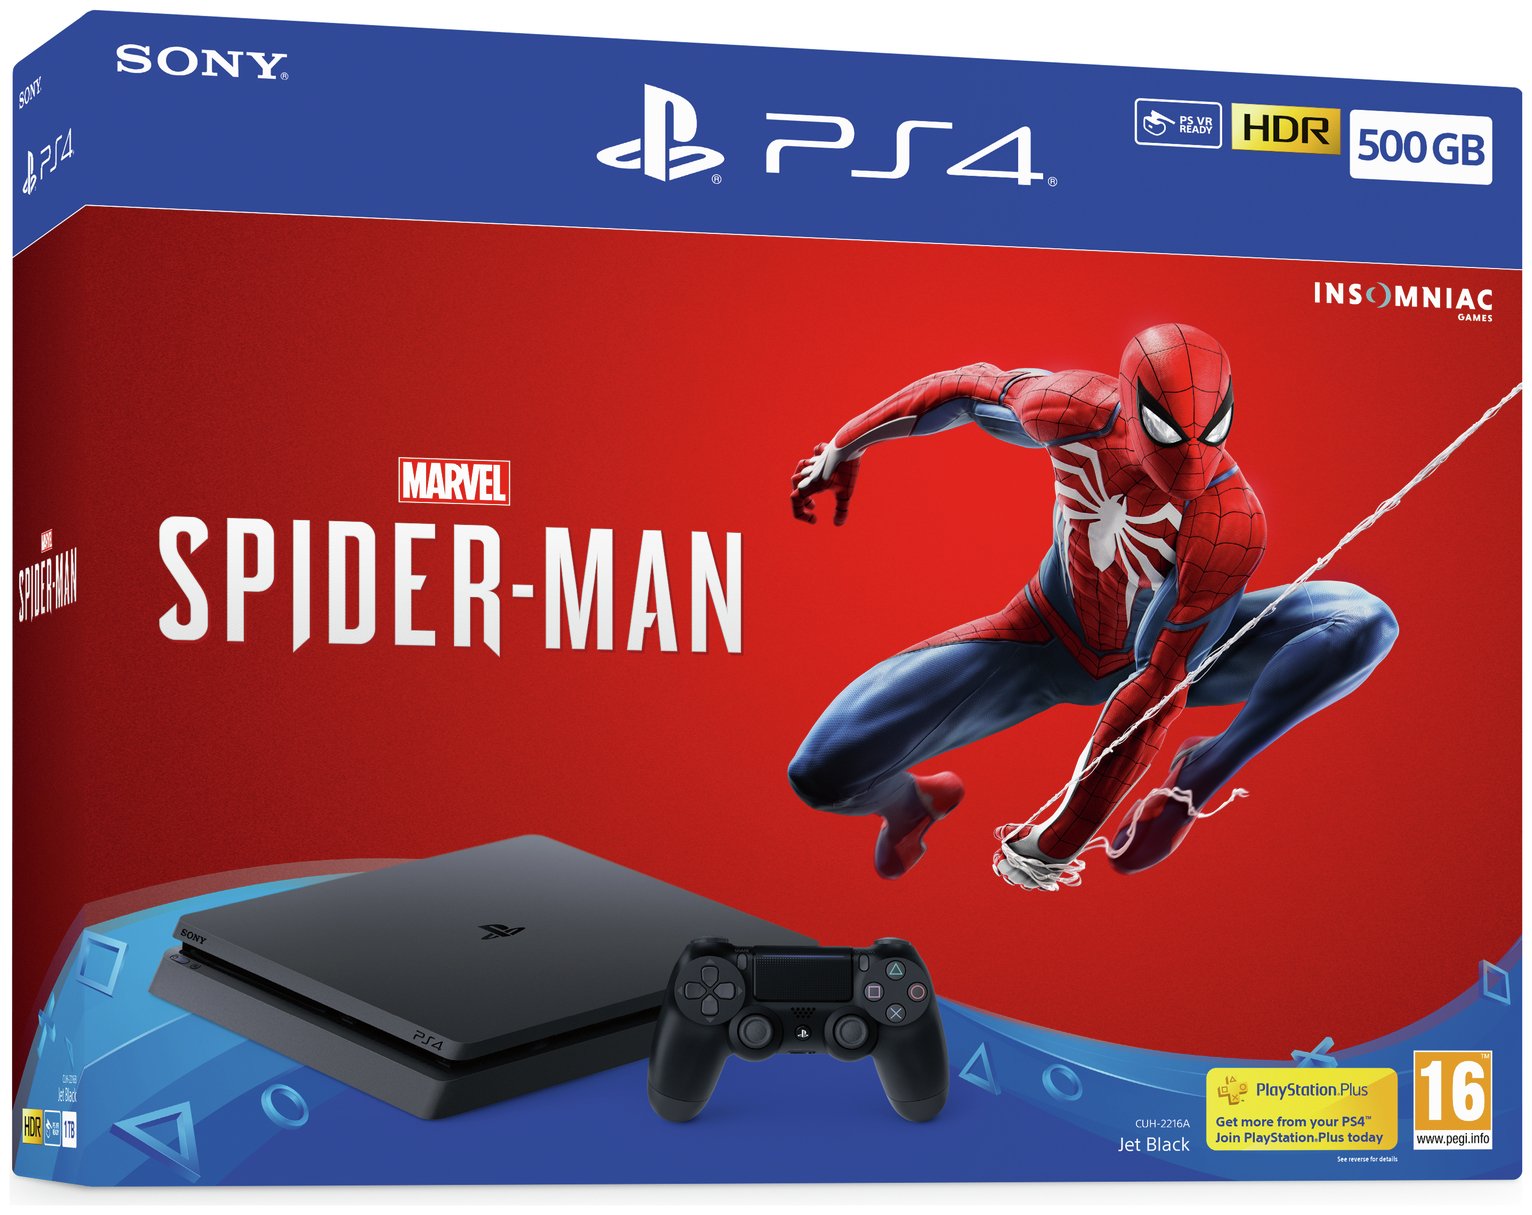 Sony PS4 500GB Marvel's Spiderman Console & Game Bundle Reviews